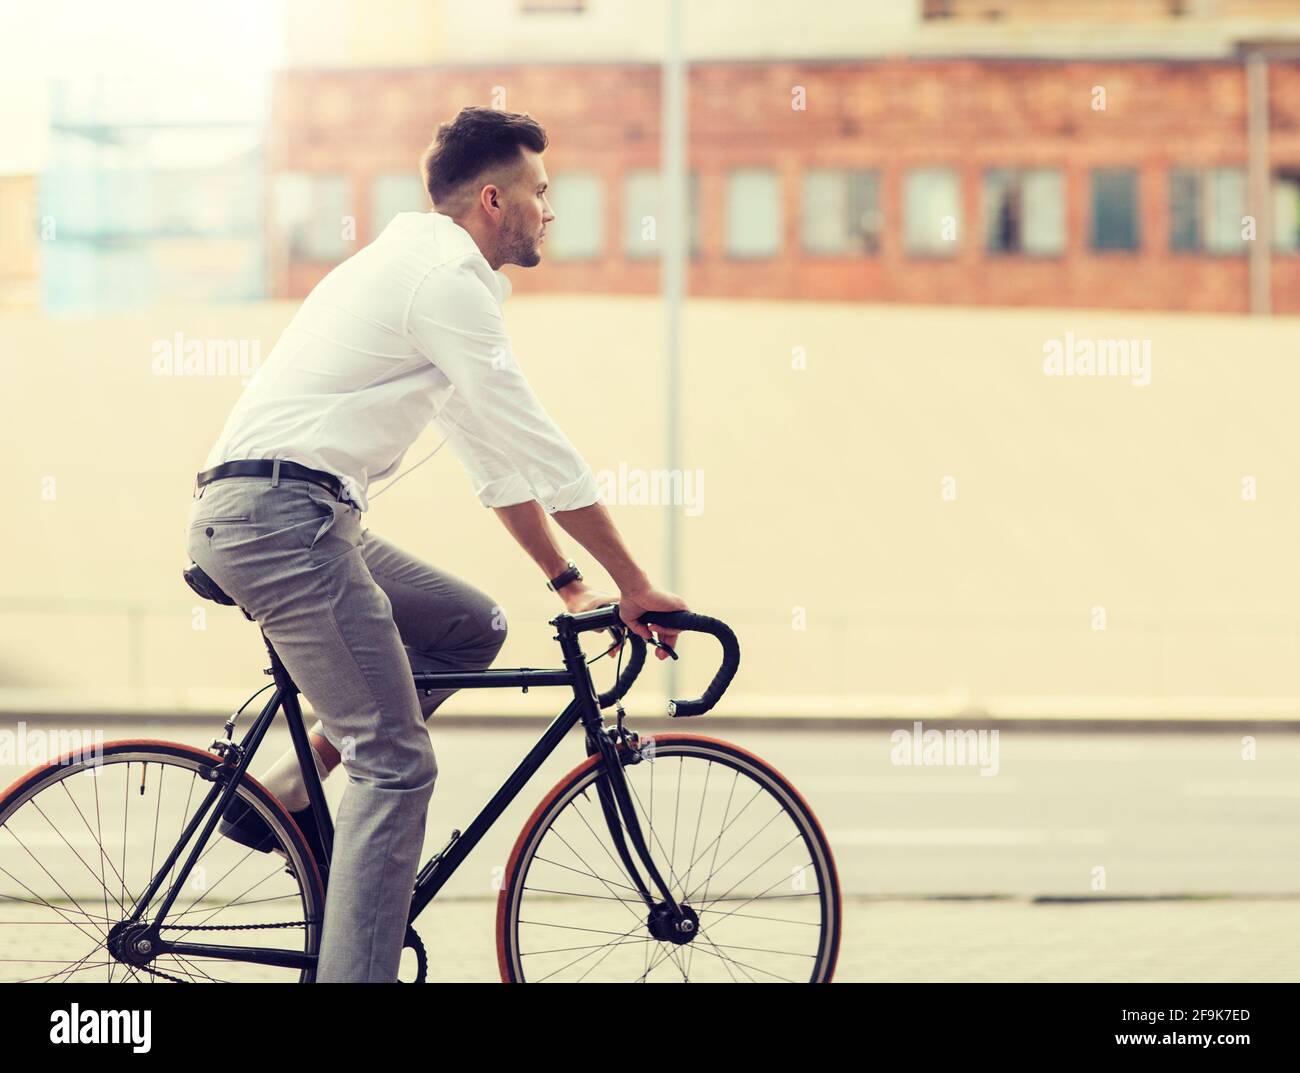 man with headphones riding bicycle on city street Stock Photo